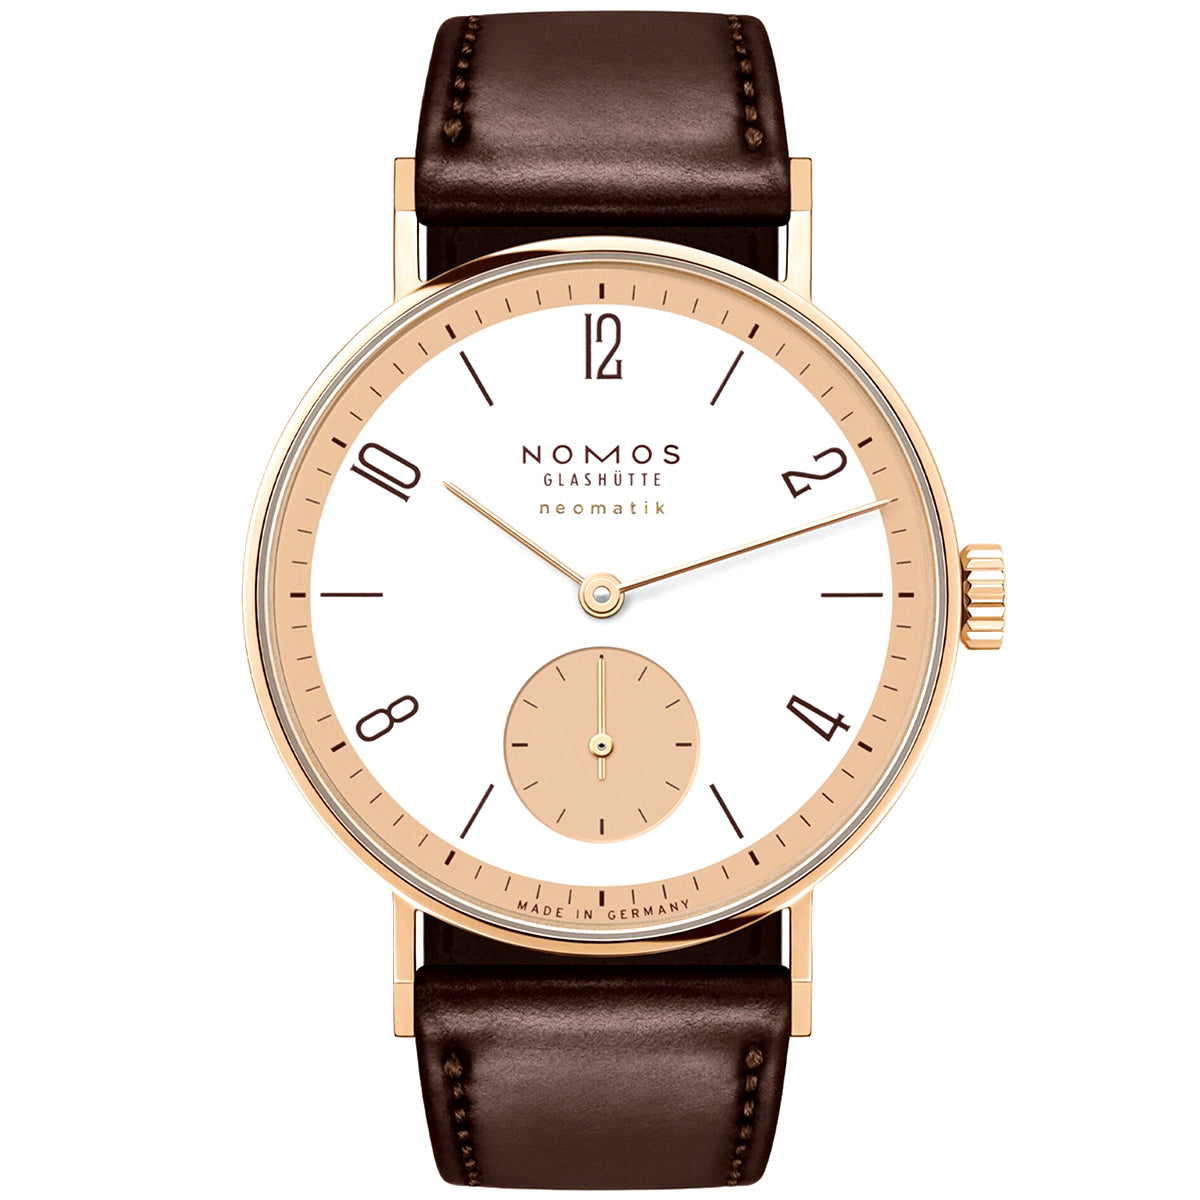 Tangente '175 Years Watchmaking Glashutte' Limited Edition Watch